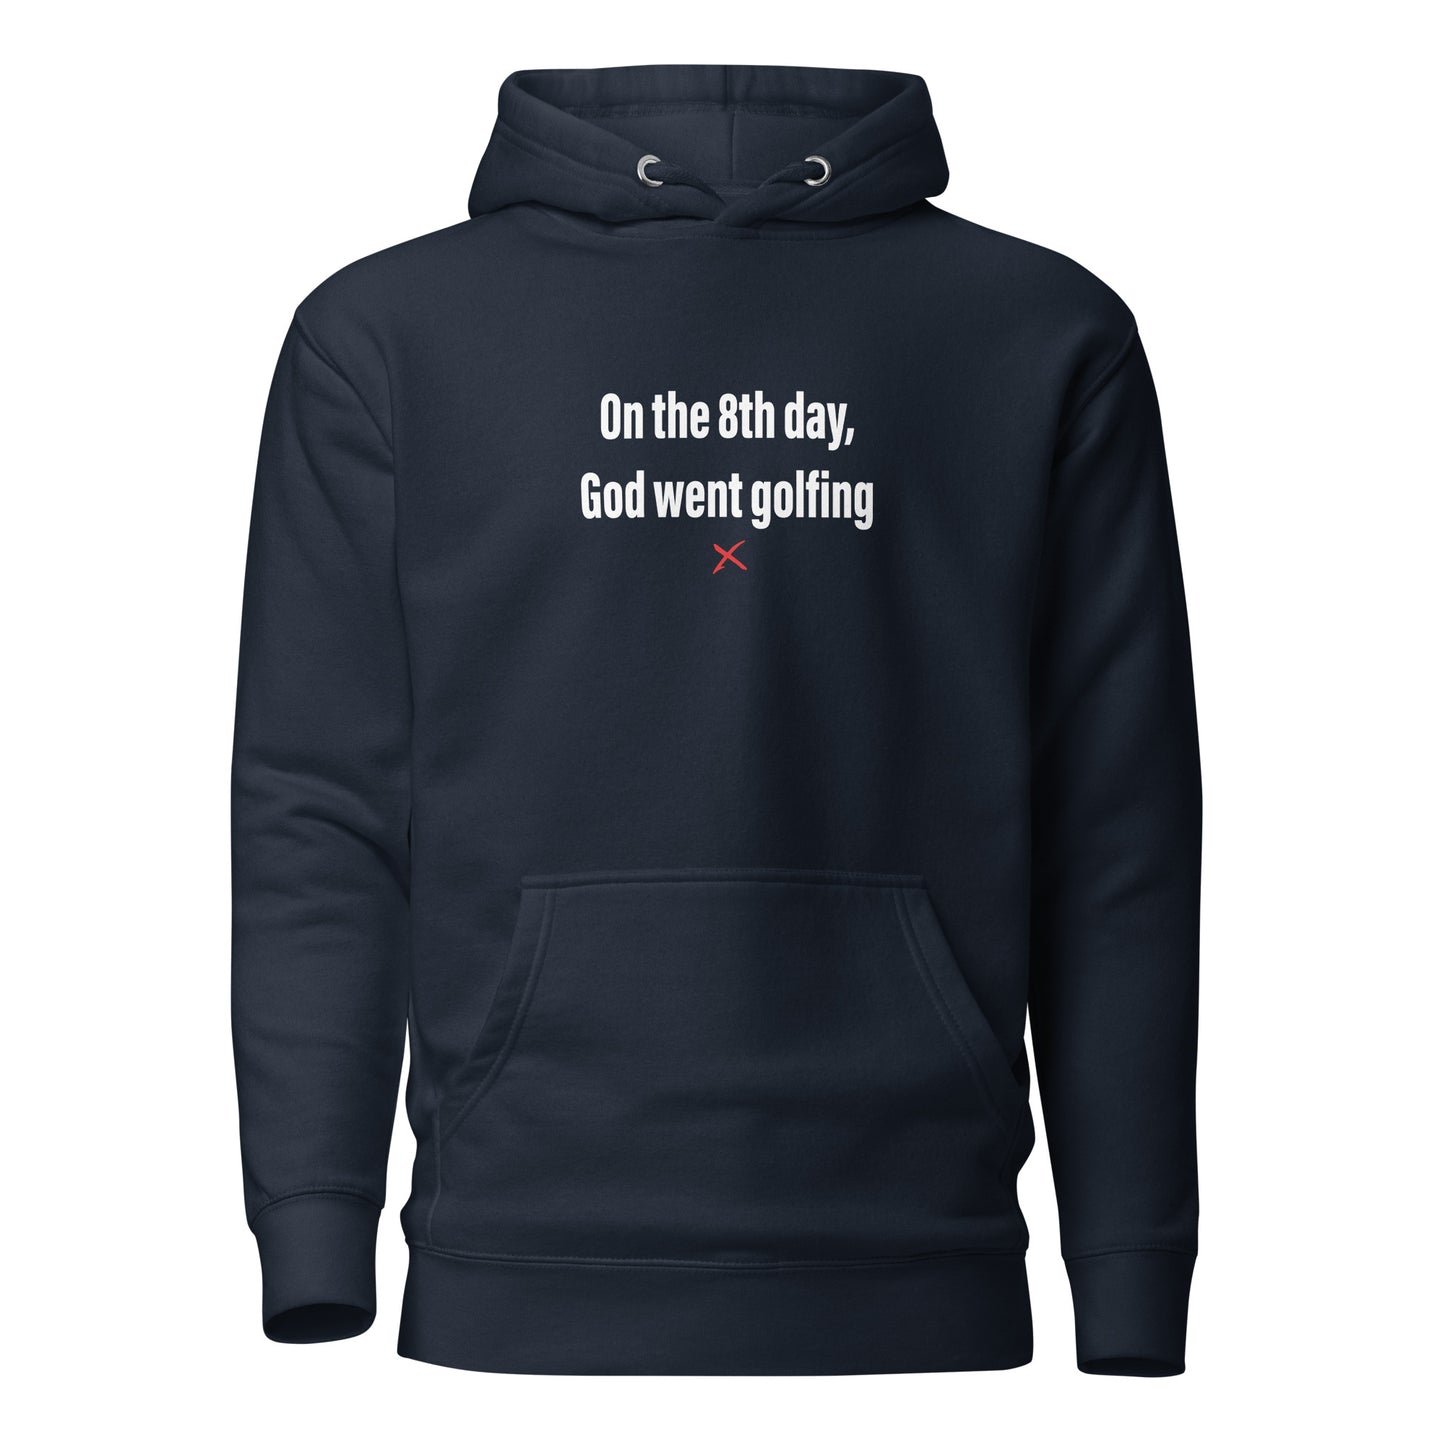 On the 8th day, God went golfing - Hoodie